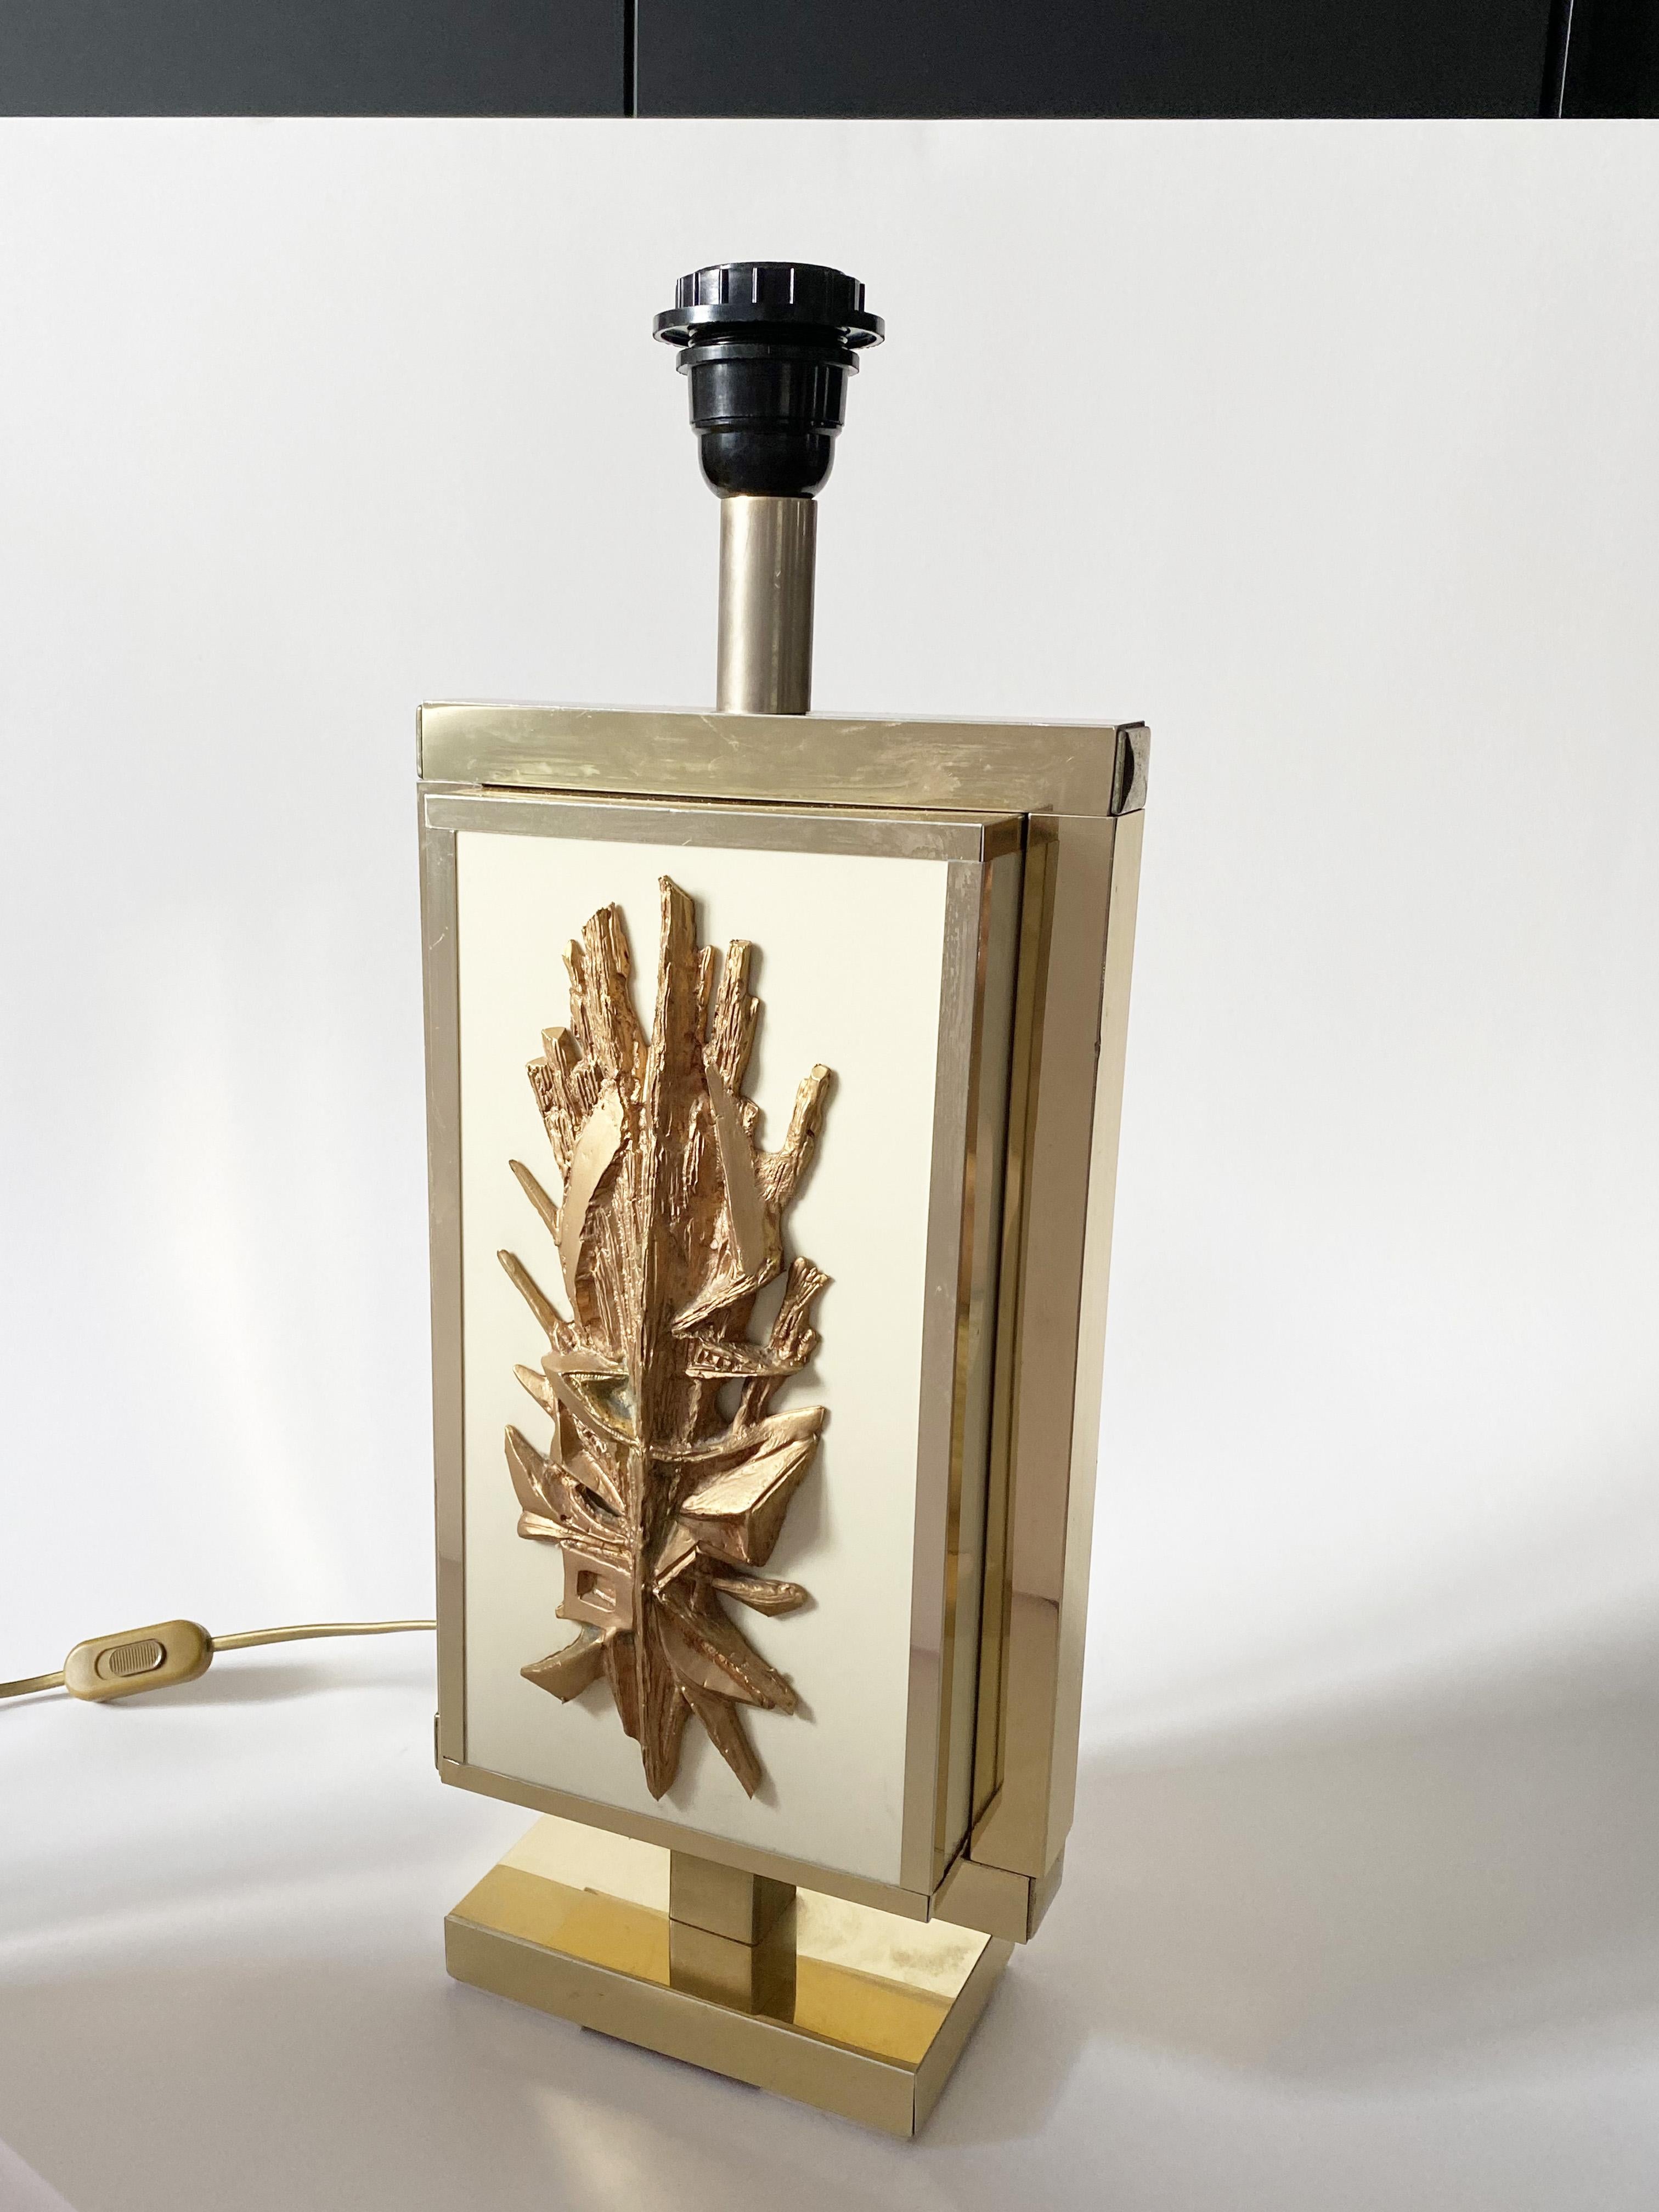 Mid-century Brutalist Table Lamp in Brass and Resin by Philippe Cheverny, 1970s.
Good condition, some scratches.